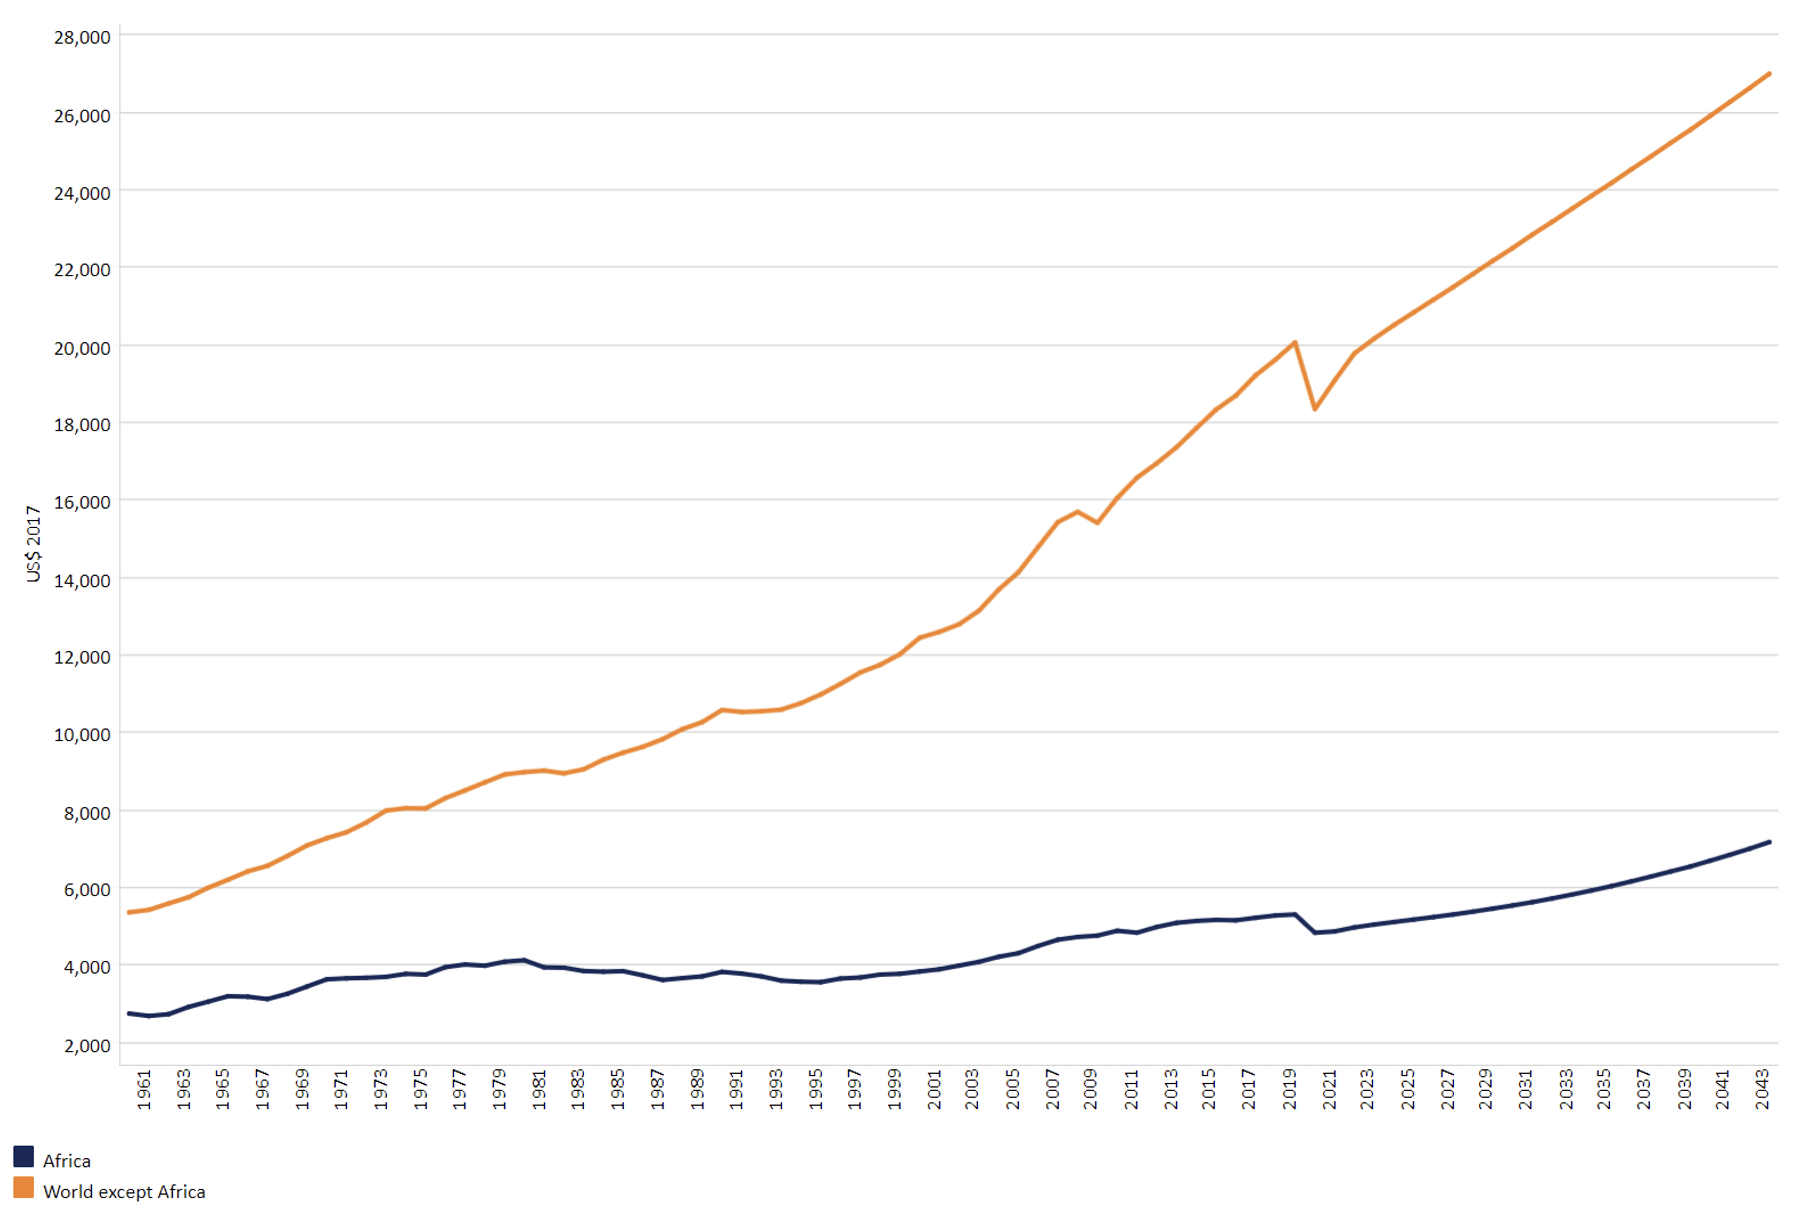 History and forecast of GDP per capita for Africa and the rest of the world, 1963 to 2043